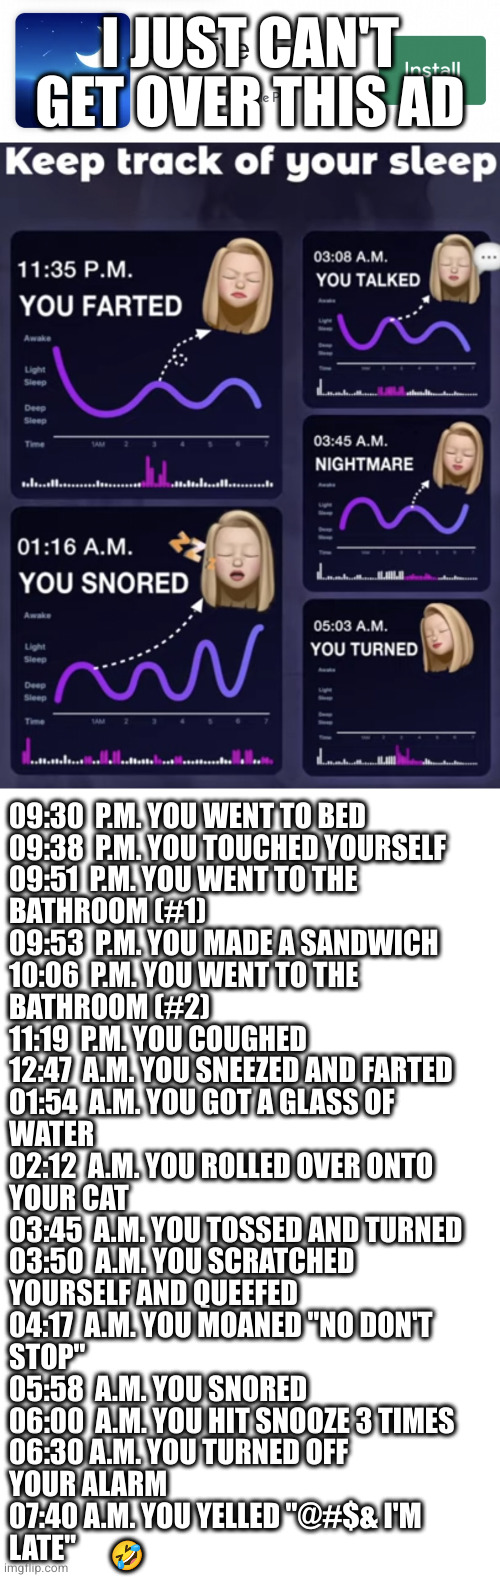 sleep app | I JUST CAN'T GET OVER THIS AD; 09:30  P.M. YOU WENT TO BED
09:38  P.M. YOU TOUCHED YOURSELF
09:51  P.M. YOU WENT TO THE
BATHROOM (#1)
09:53  P.M. YOU MADE A SANDWICH
10:06  P.M. YOU WENT TO THE 
BATHROOM (#2)
11:19  P.M. YOU COUGHED
12:47  A.M. YOU SNEEZED AND FARTED
01:54  A.M. YOU GOT A GLASS OF 
WATER
02:12  A.M. YOU ROLLED OVER ONTO
YOUR CAT
03:45  A.M. YOU TOSSED AND TURNED
03:50  A.M. YOU SCRATCHED 
YOURSELF AND QUEEFED
04:17  A.M. YOU MOANED "NO DON'T
STOP"
05:58  A.M. YOU SNORED
06:00  A.M. YOU HIT SNOOZE 3 TIMES
06:30 A.M. YOU TURNED OFF
YOUR ALARM
07:40 A.M. YOU YELLED "@#$& I'M 
LATE"; 🤣 | image tagged in sleep,late,apps | made w/ Imgflip meme maker